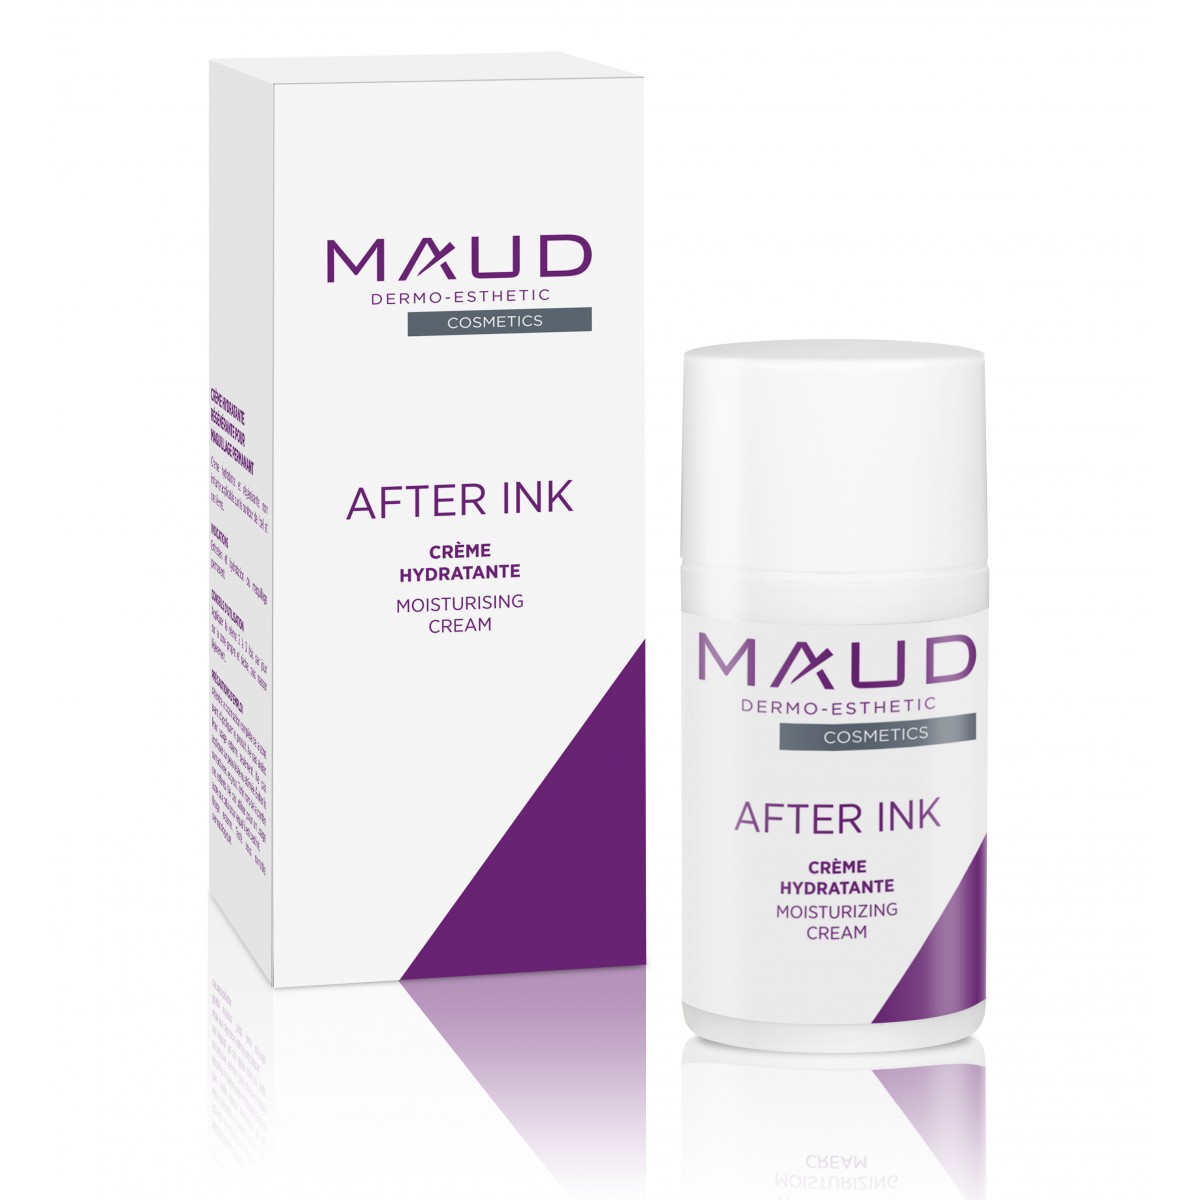 Soins maquillage permanent - MAUD COSMETICS - CREME CICATRISANTE POST MAQUILLAGE PERMANENT AFTER INK  (15 ml)